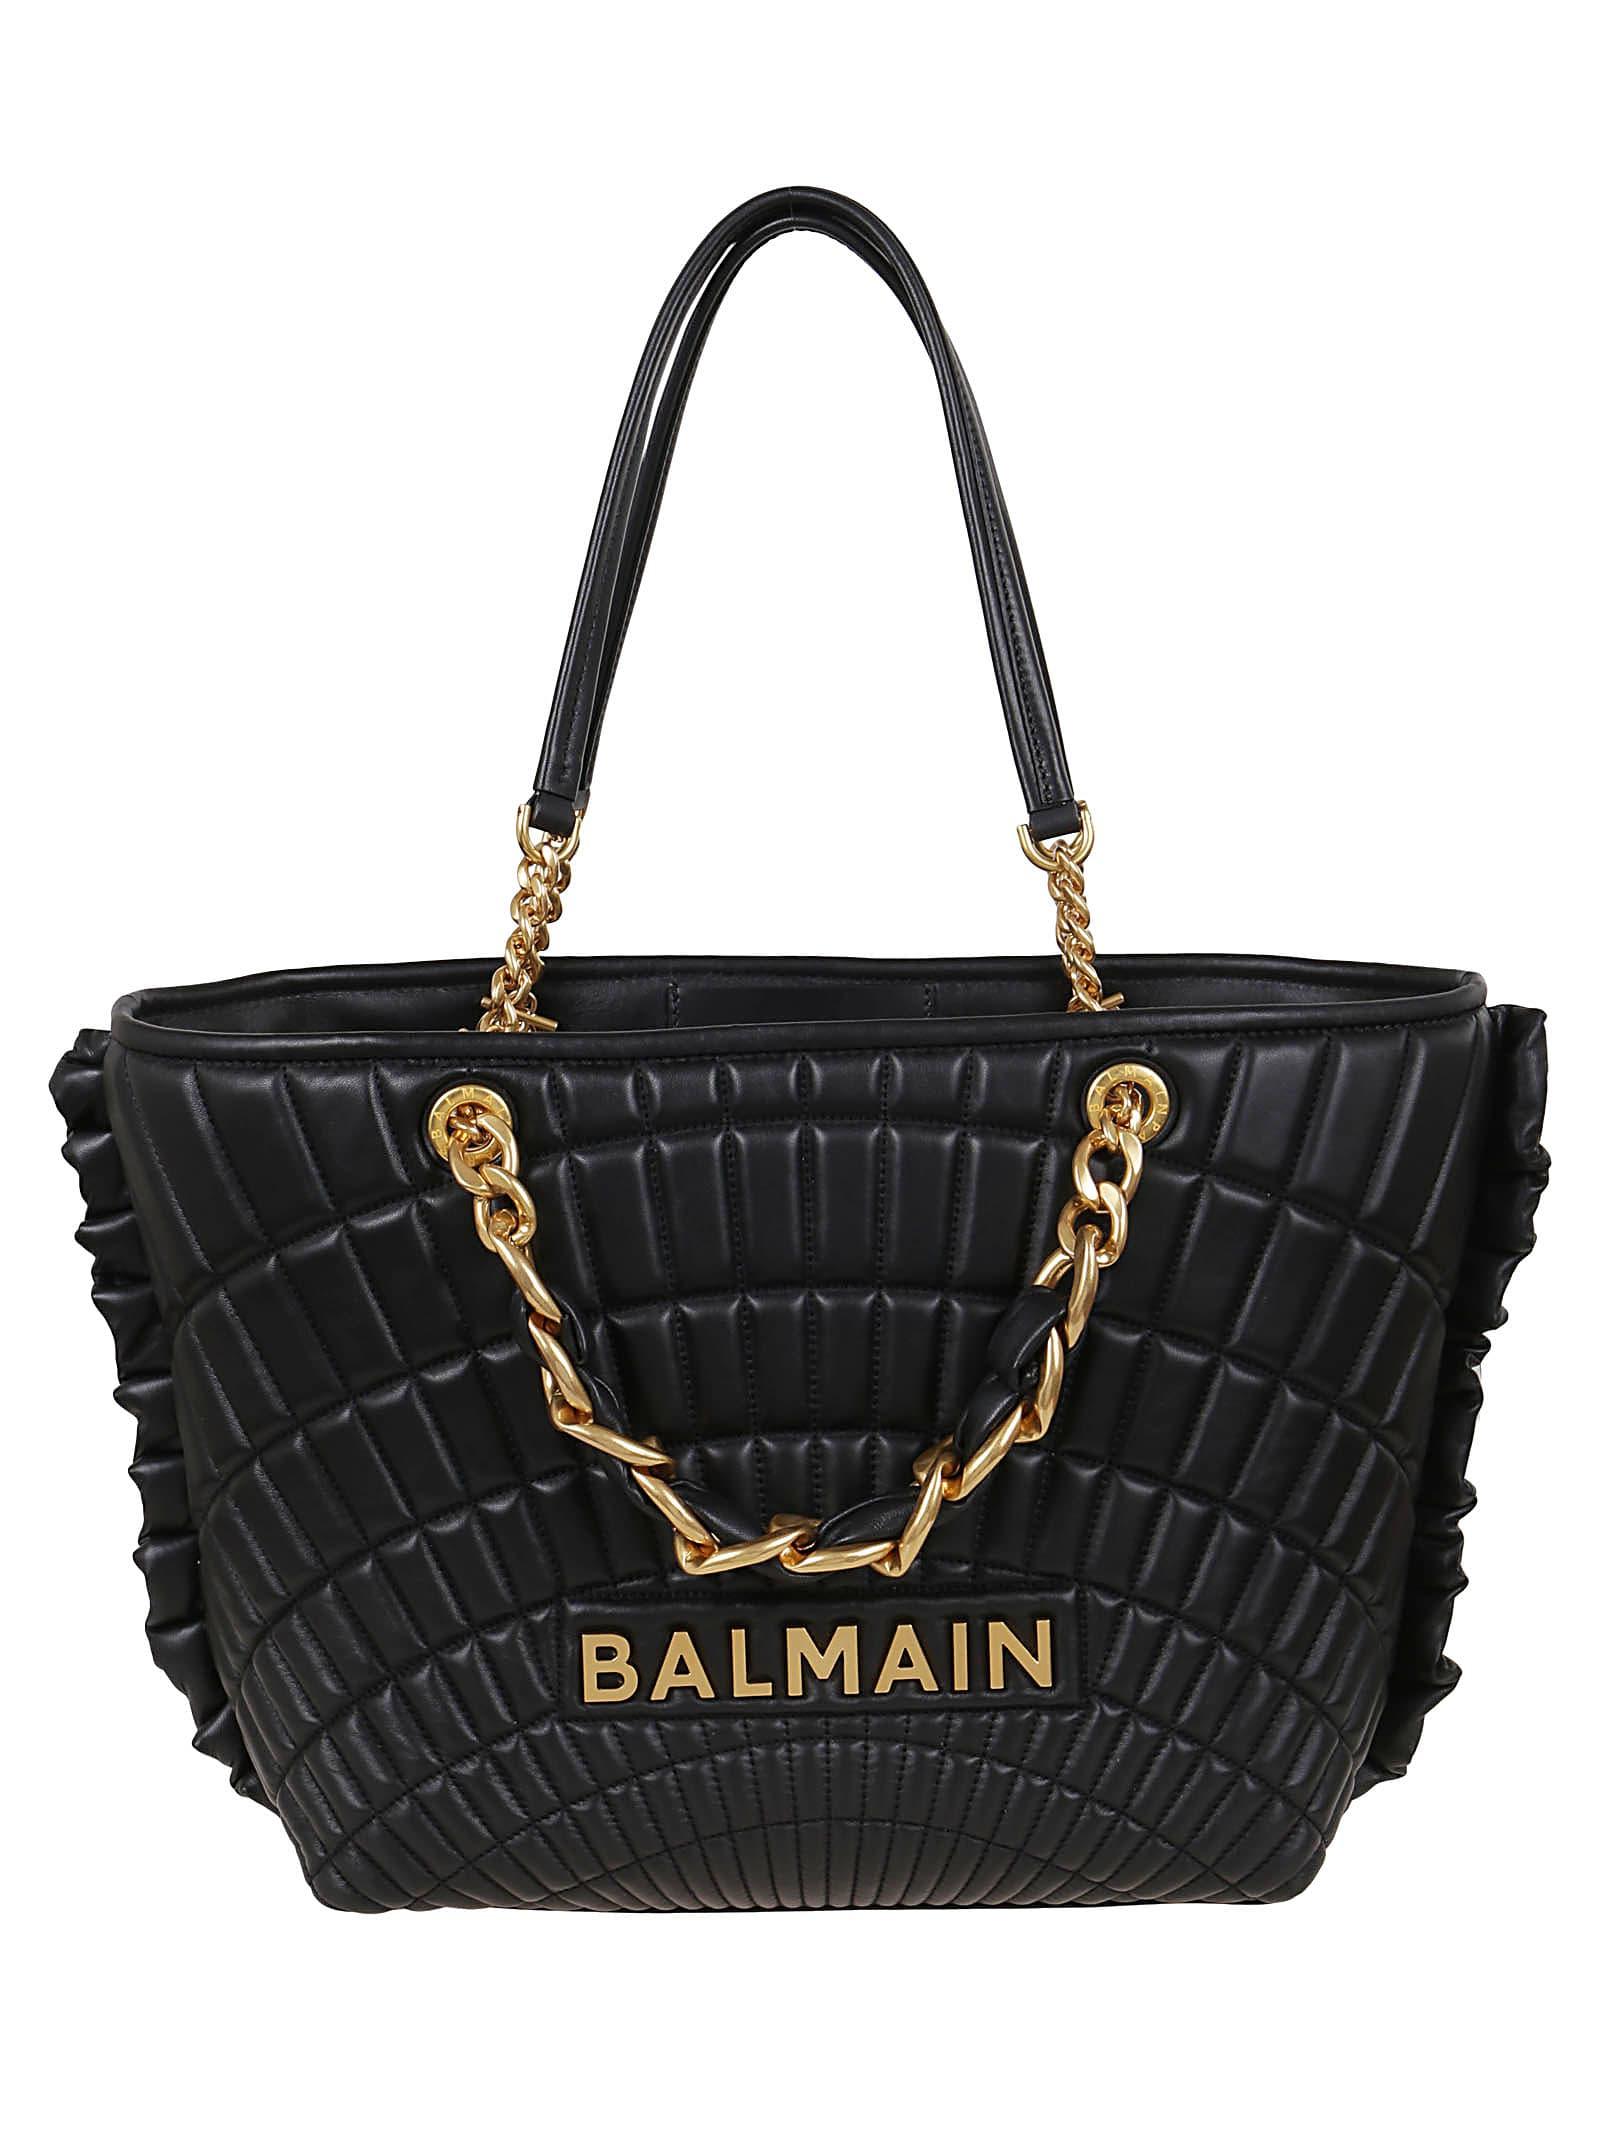 Balmain Quilted 1945 Soft Tote Bag in Black | Lyst